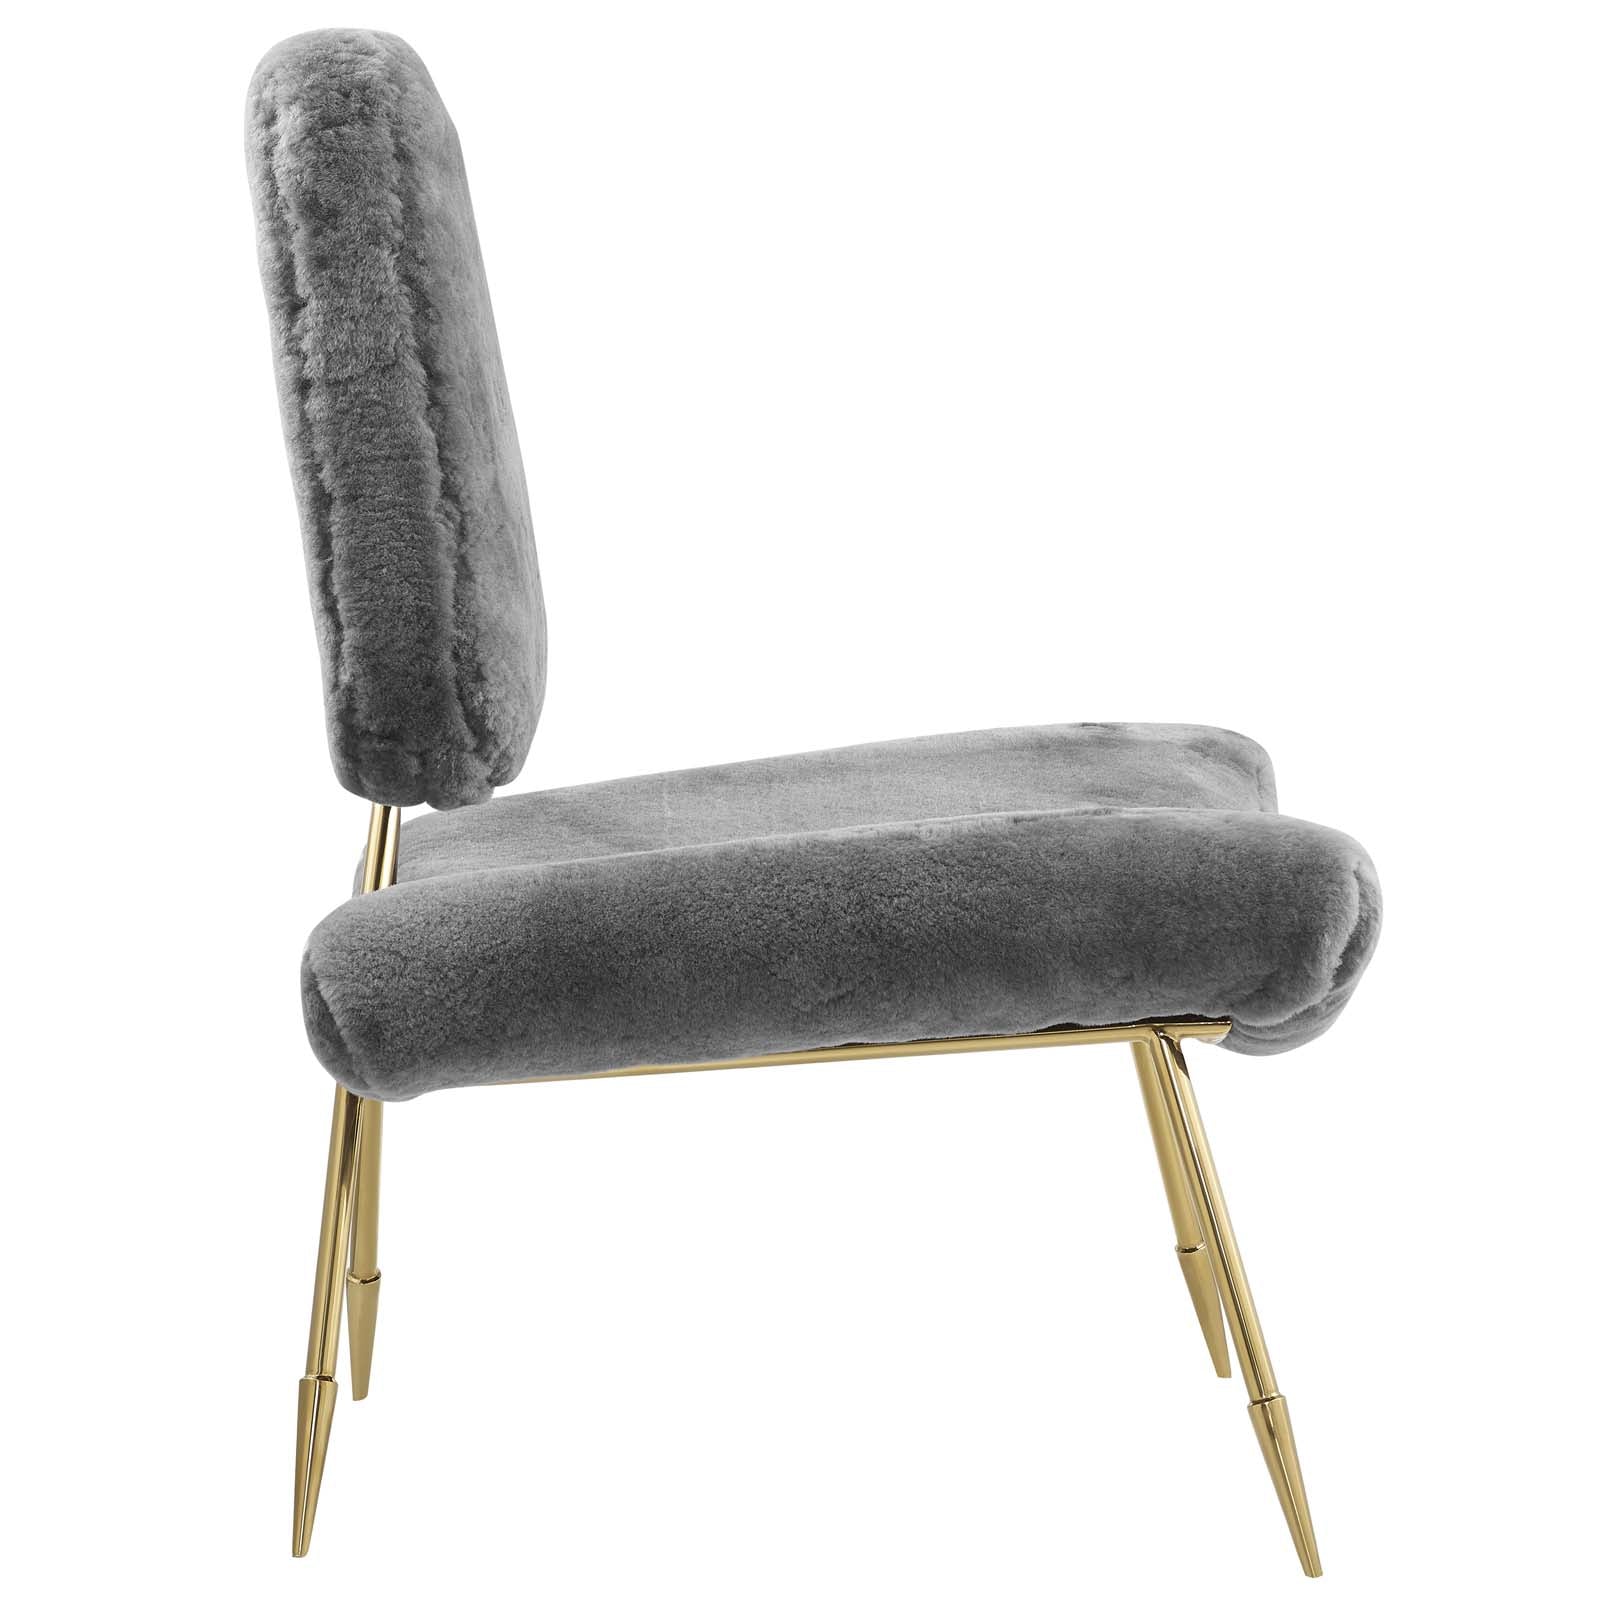 Modway Accent Chairs - Ponder Upholstered Sheepskin Fur Lounge Chair Gray